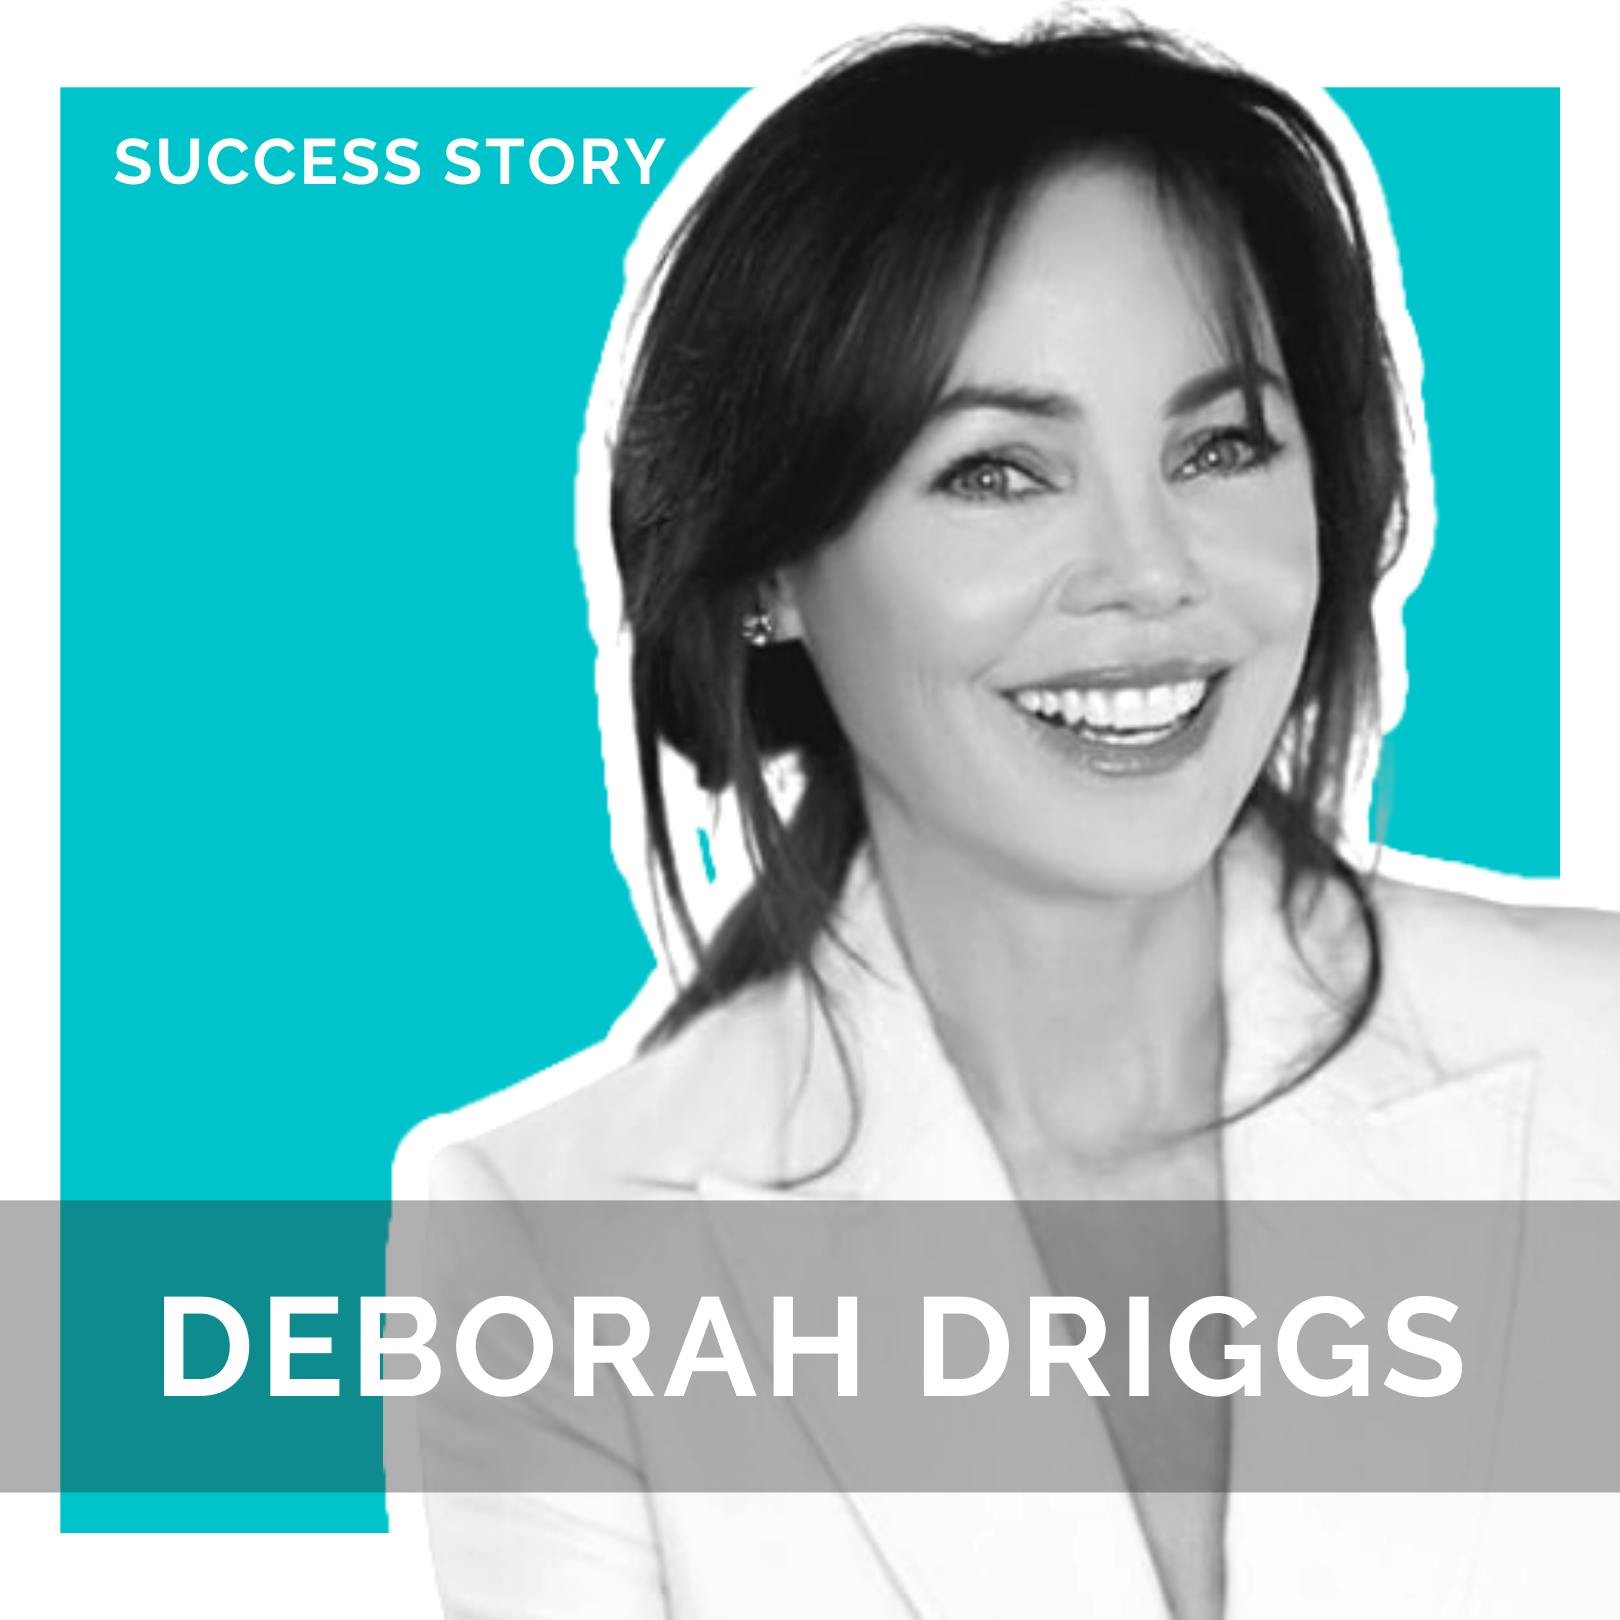 Deborah Driggs - Actress, Model & Life Insurance Specialist | From Playboy to President’s Club